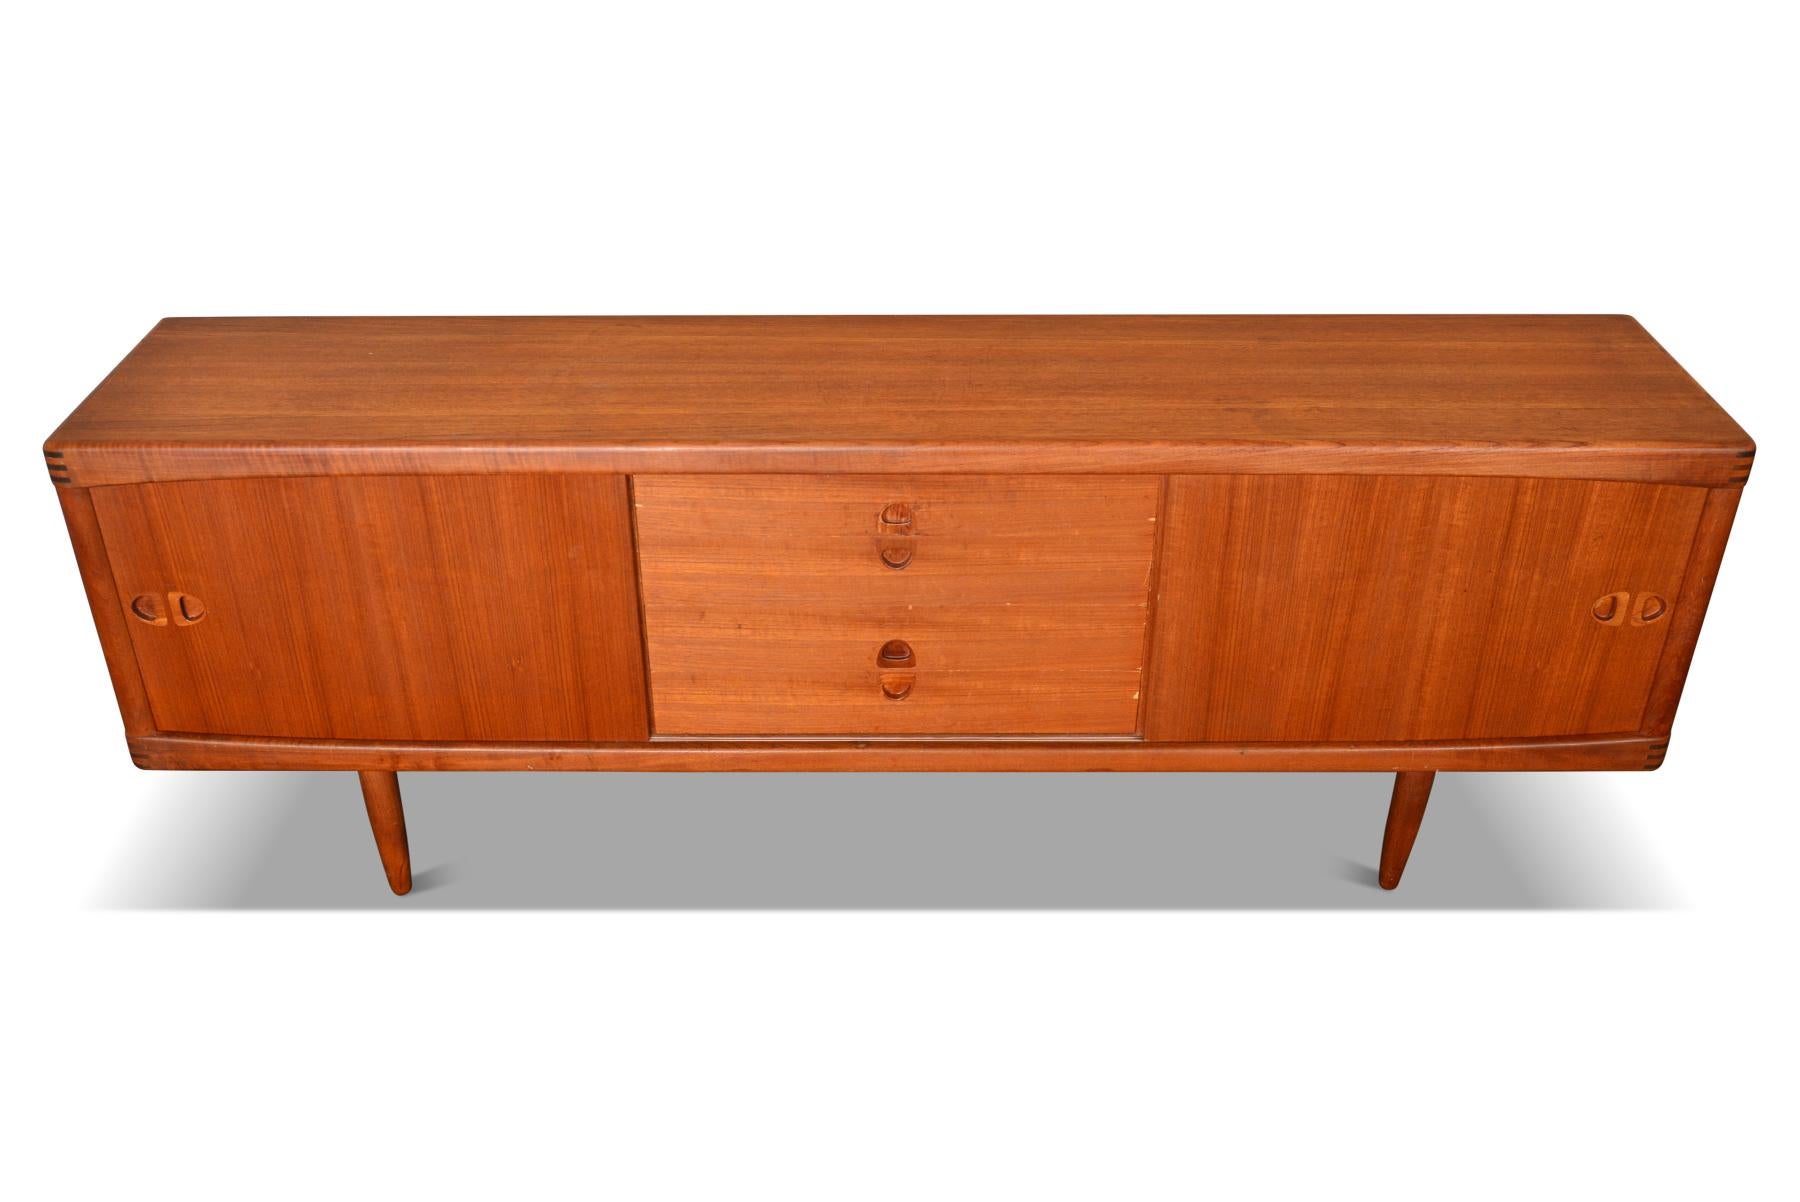 This breathtaking Danish modern midcentury teak credenza was designed by H.W. Klein and manufactured by Bramin in the 1960s. Left and right doors slide open to reveal adjustable shelving. Four center drawers provide additional storage. All doors and